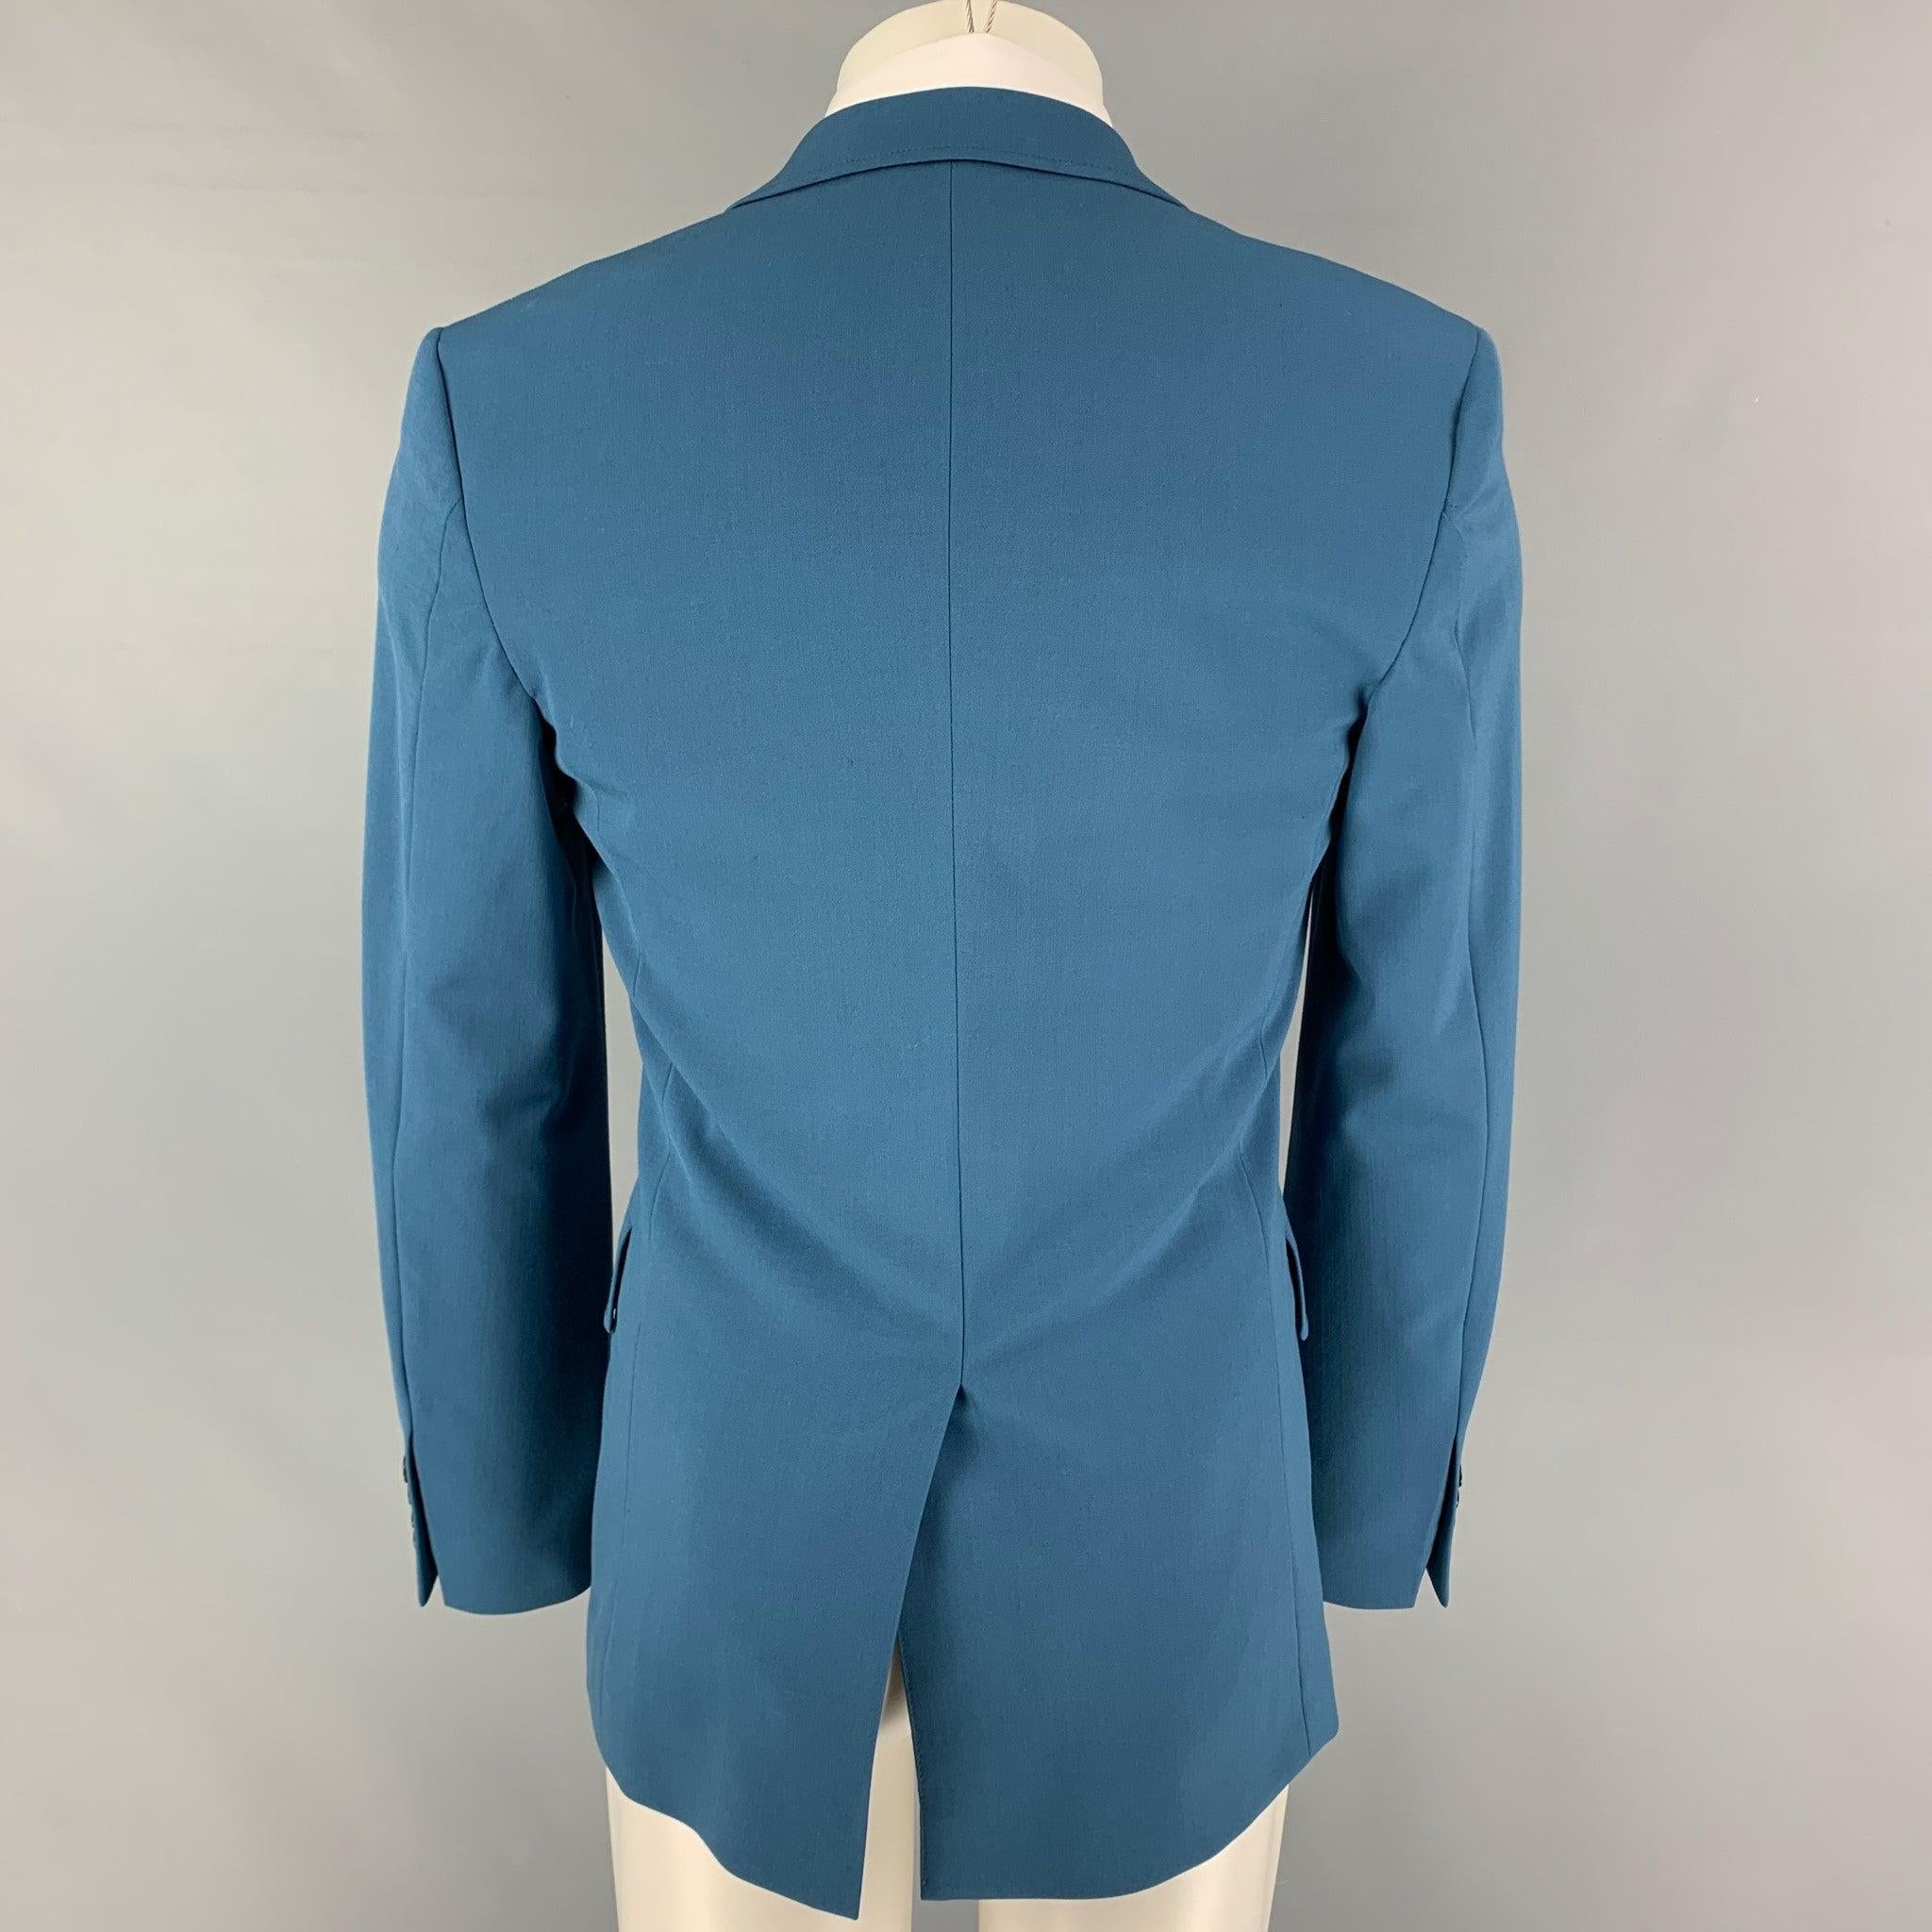 JOSEPH Size 38 Teal Polyester Blend Notch Lapel Sport Coat In Good Condition For Sale In San Francisco, CA